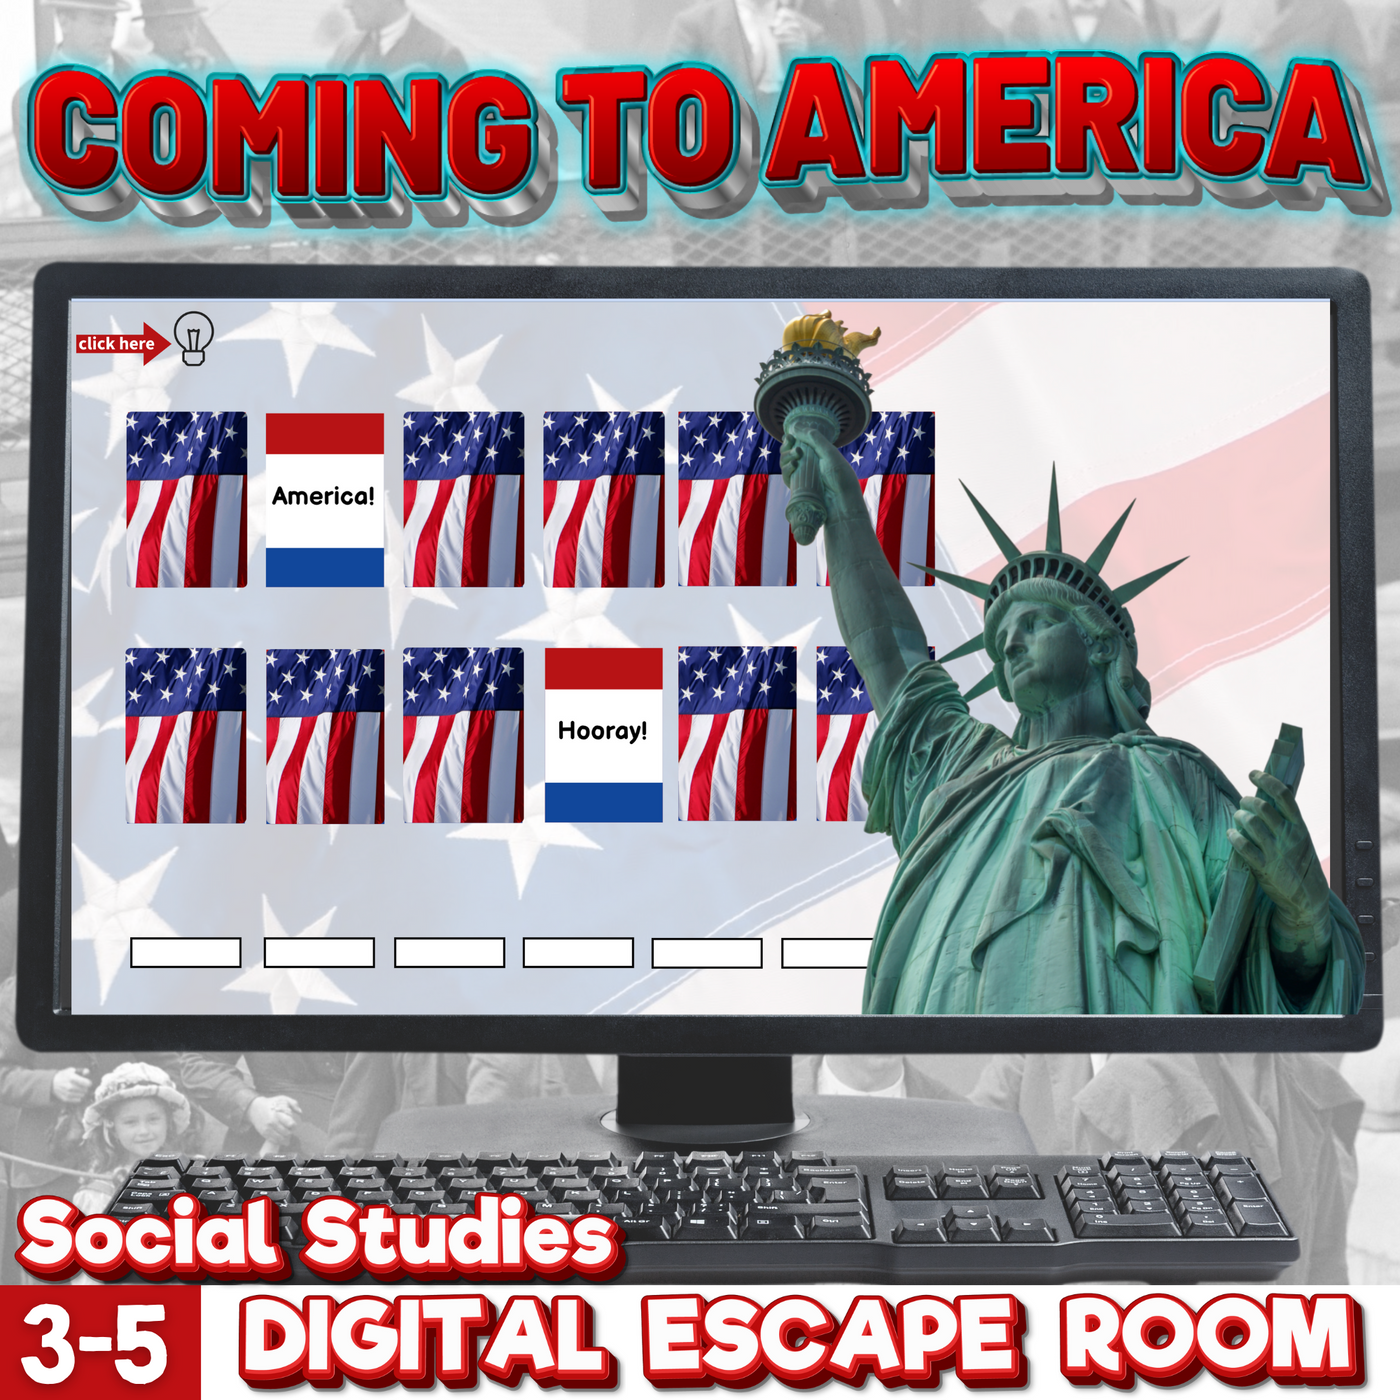 Ellis Island Digital Escape Room for Immigration Coming to America